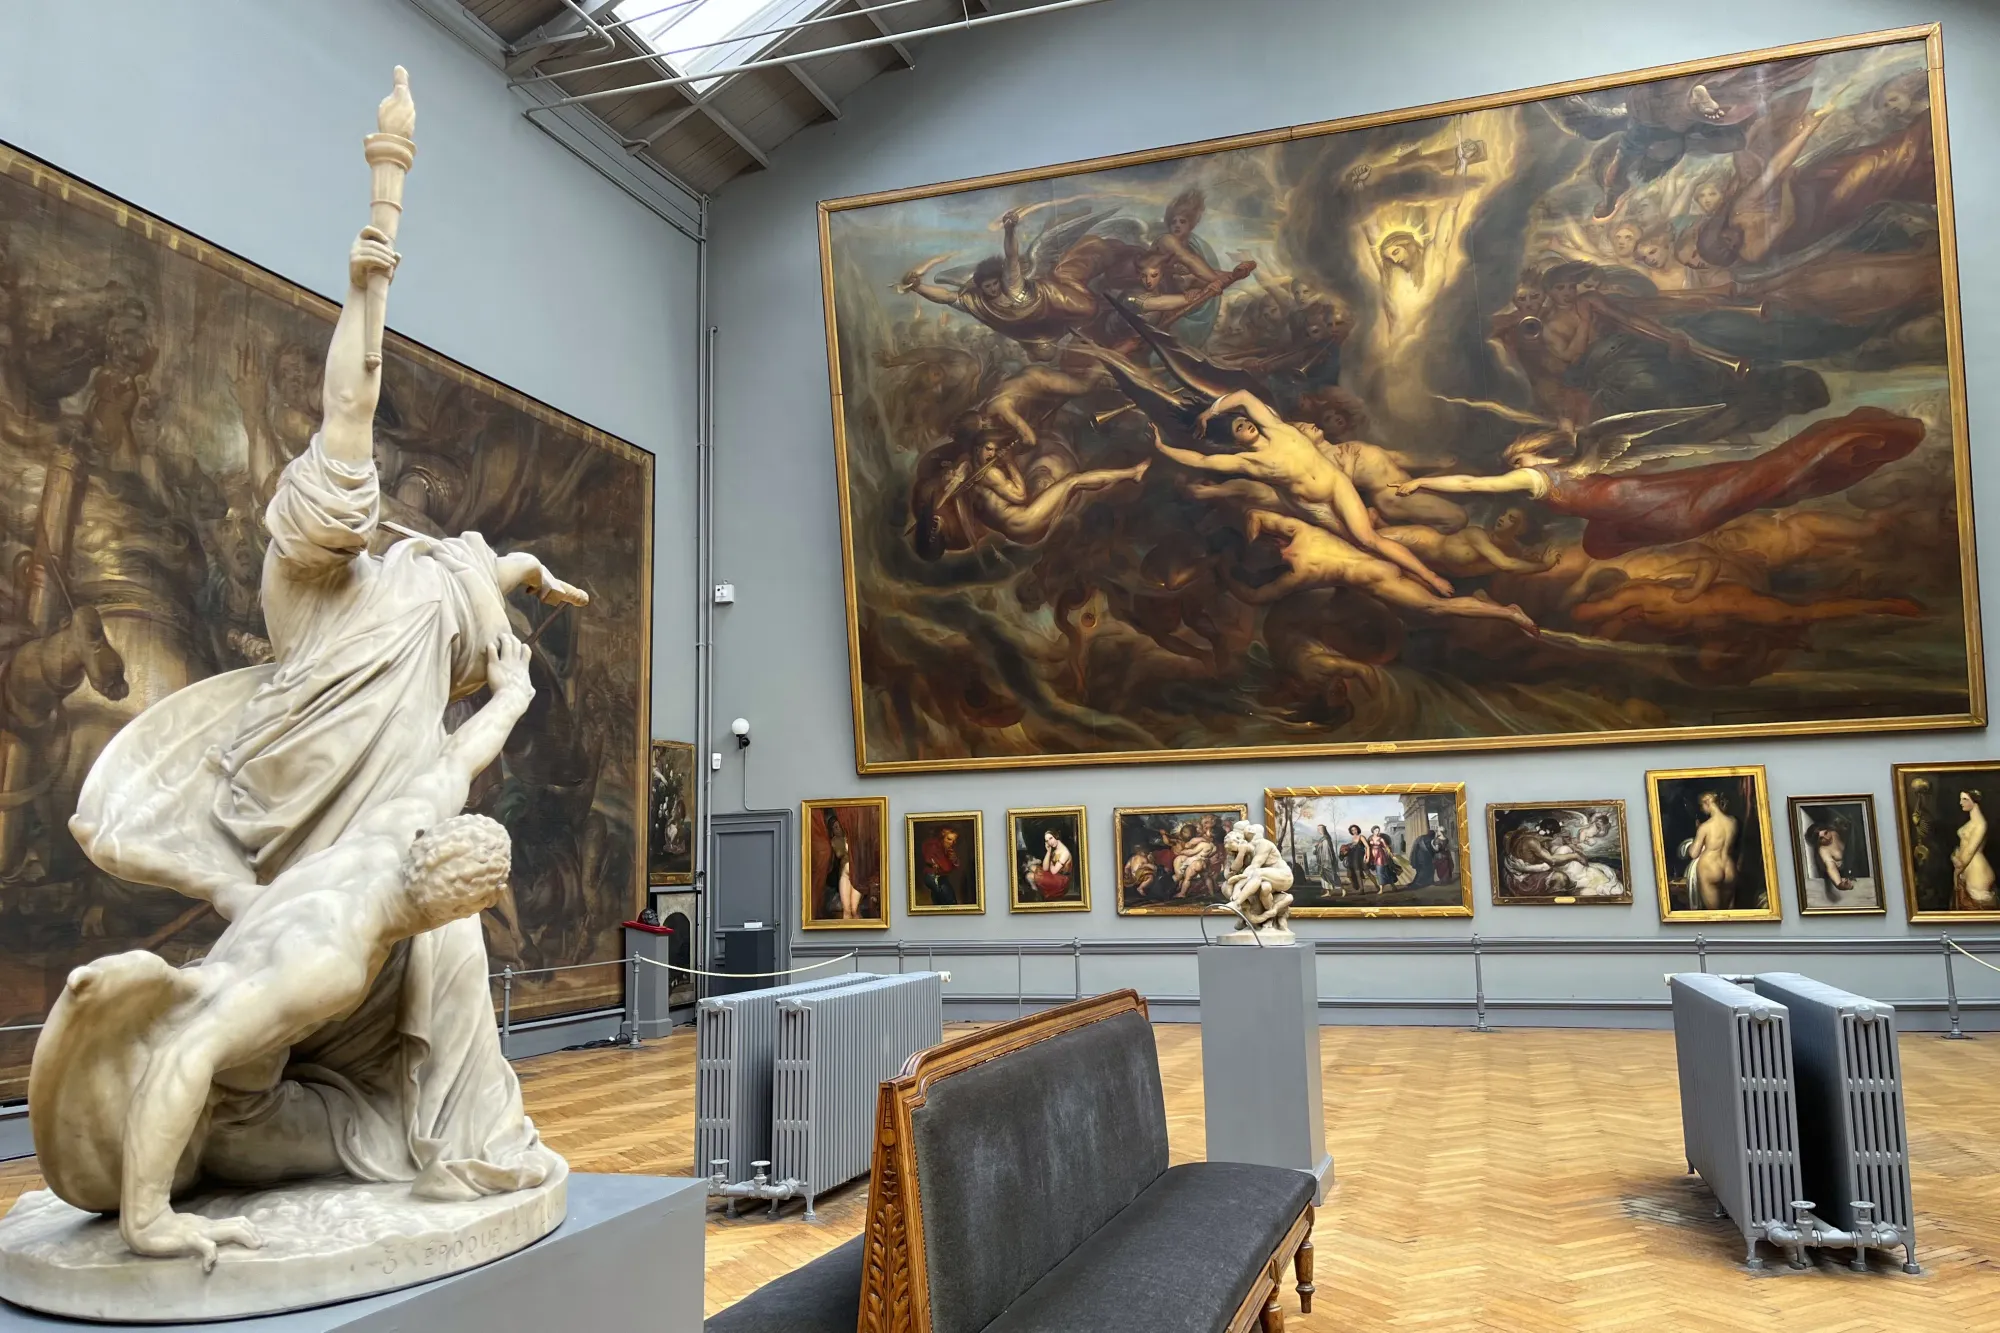 Large canvases with a smaller statue in the foreground